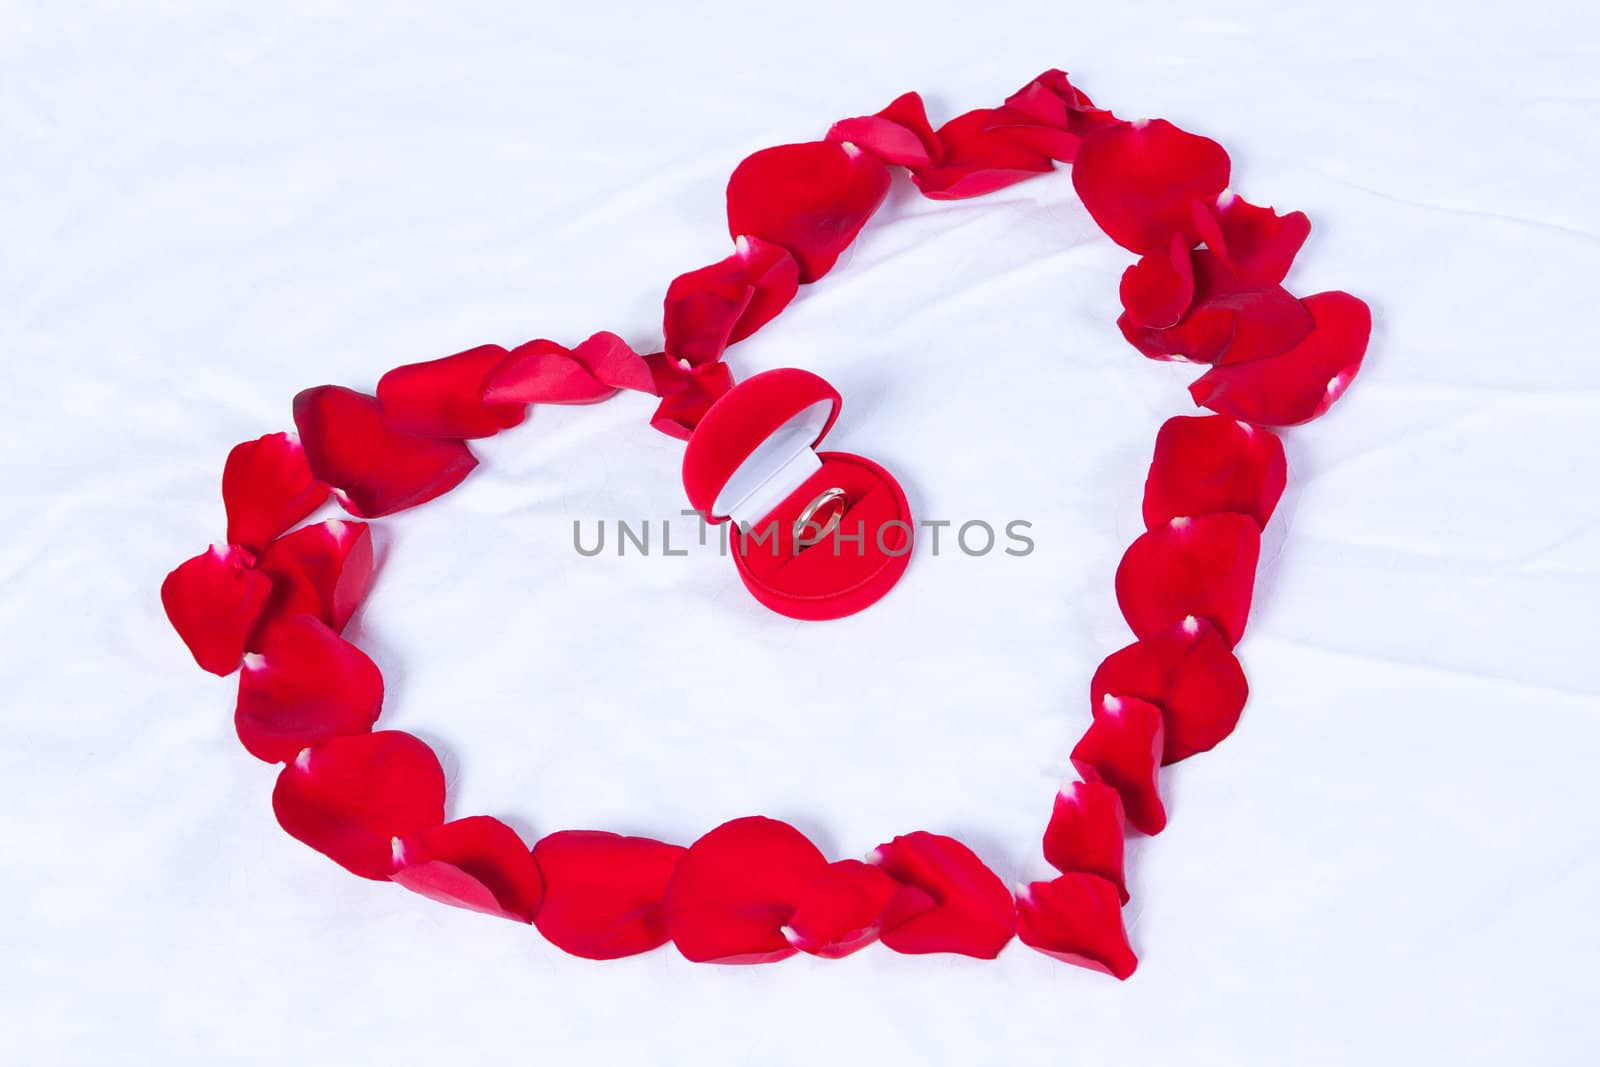 Wedding rings in the red box lie on the bed in the heart of rose petals